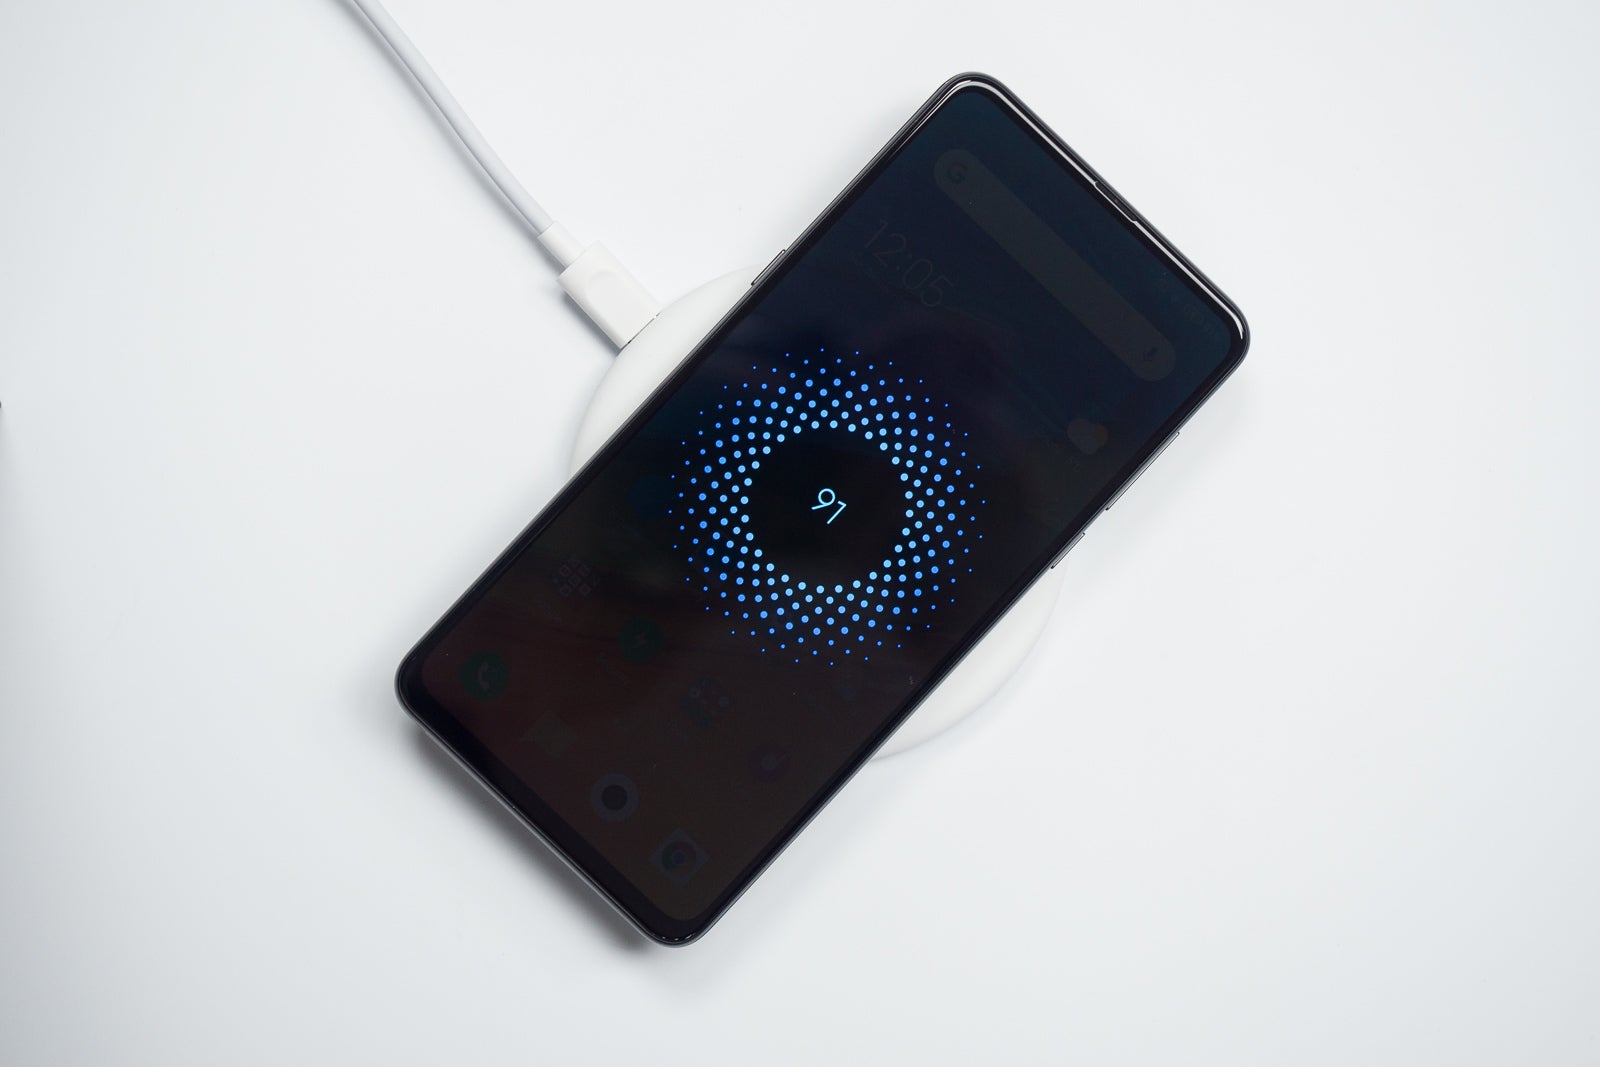 Xiaomi Mi Mix 3 is one of the few phones that come with a wireless charger in the box - Wireless charging is an overrated feature, change my mind